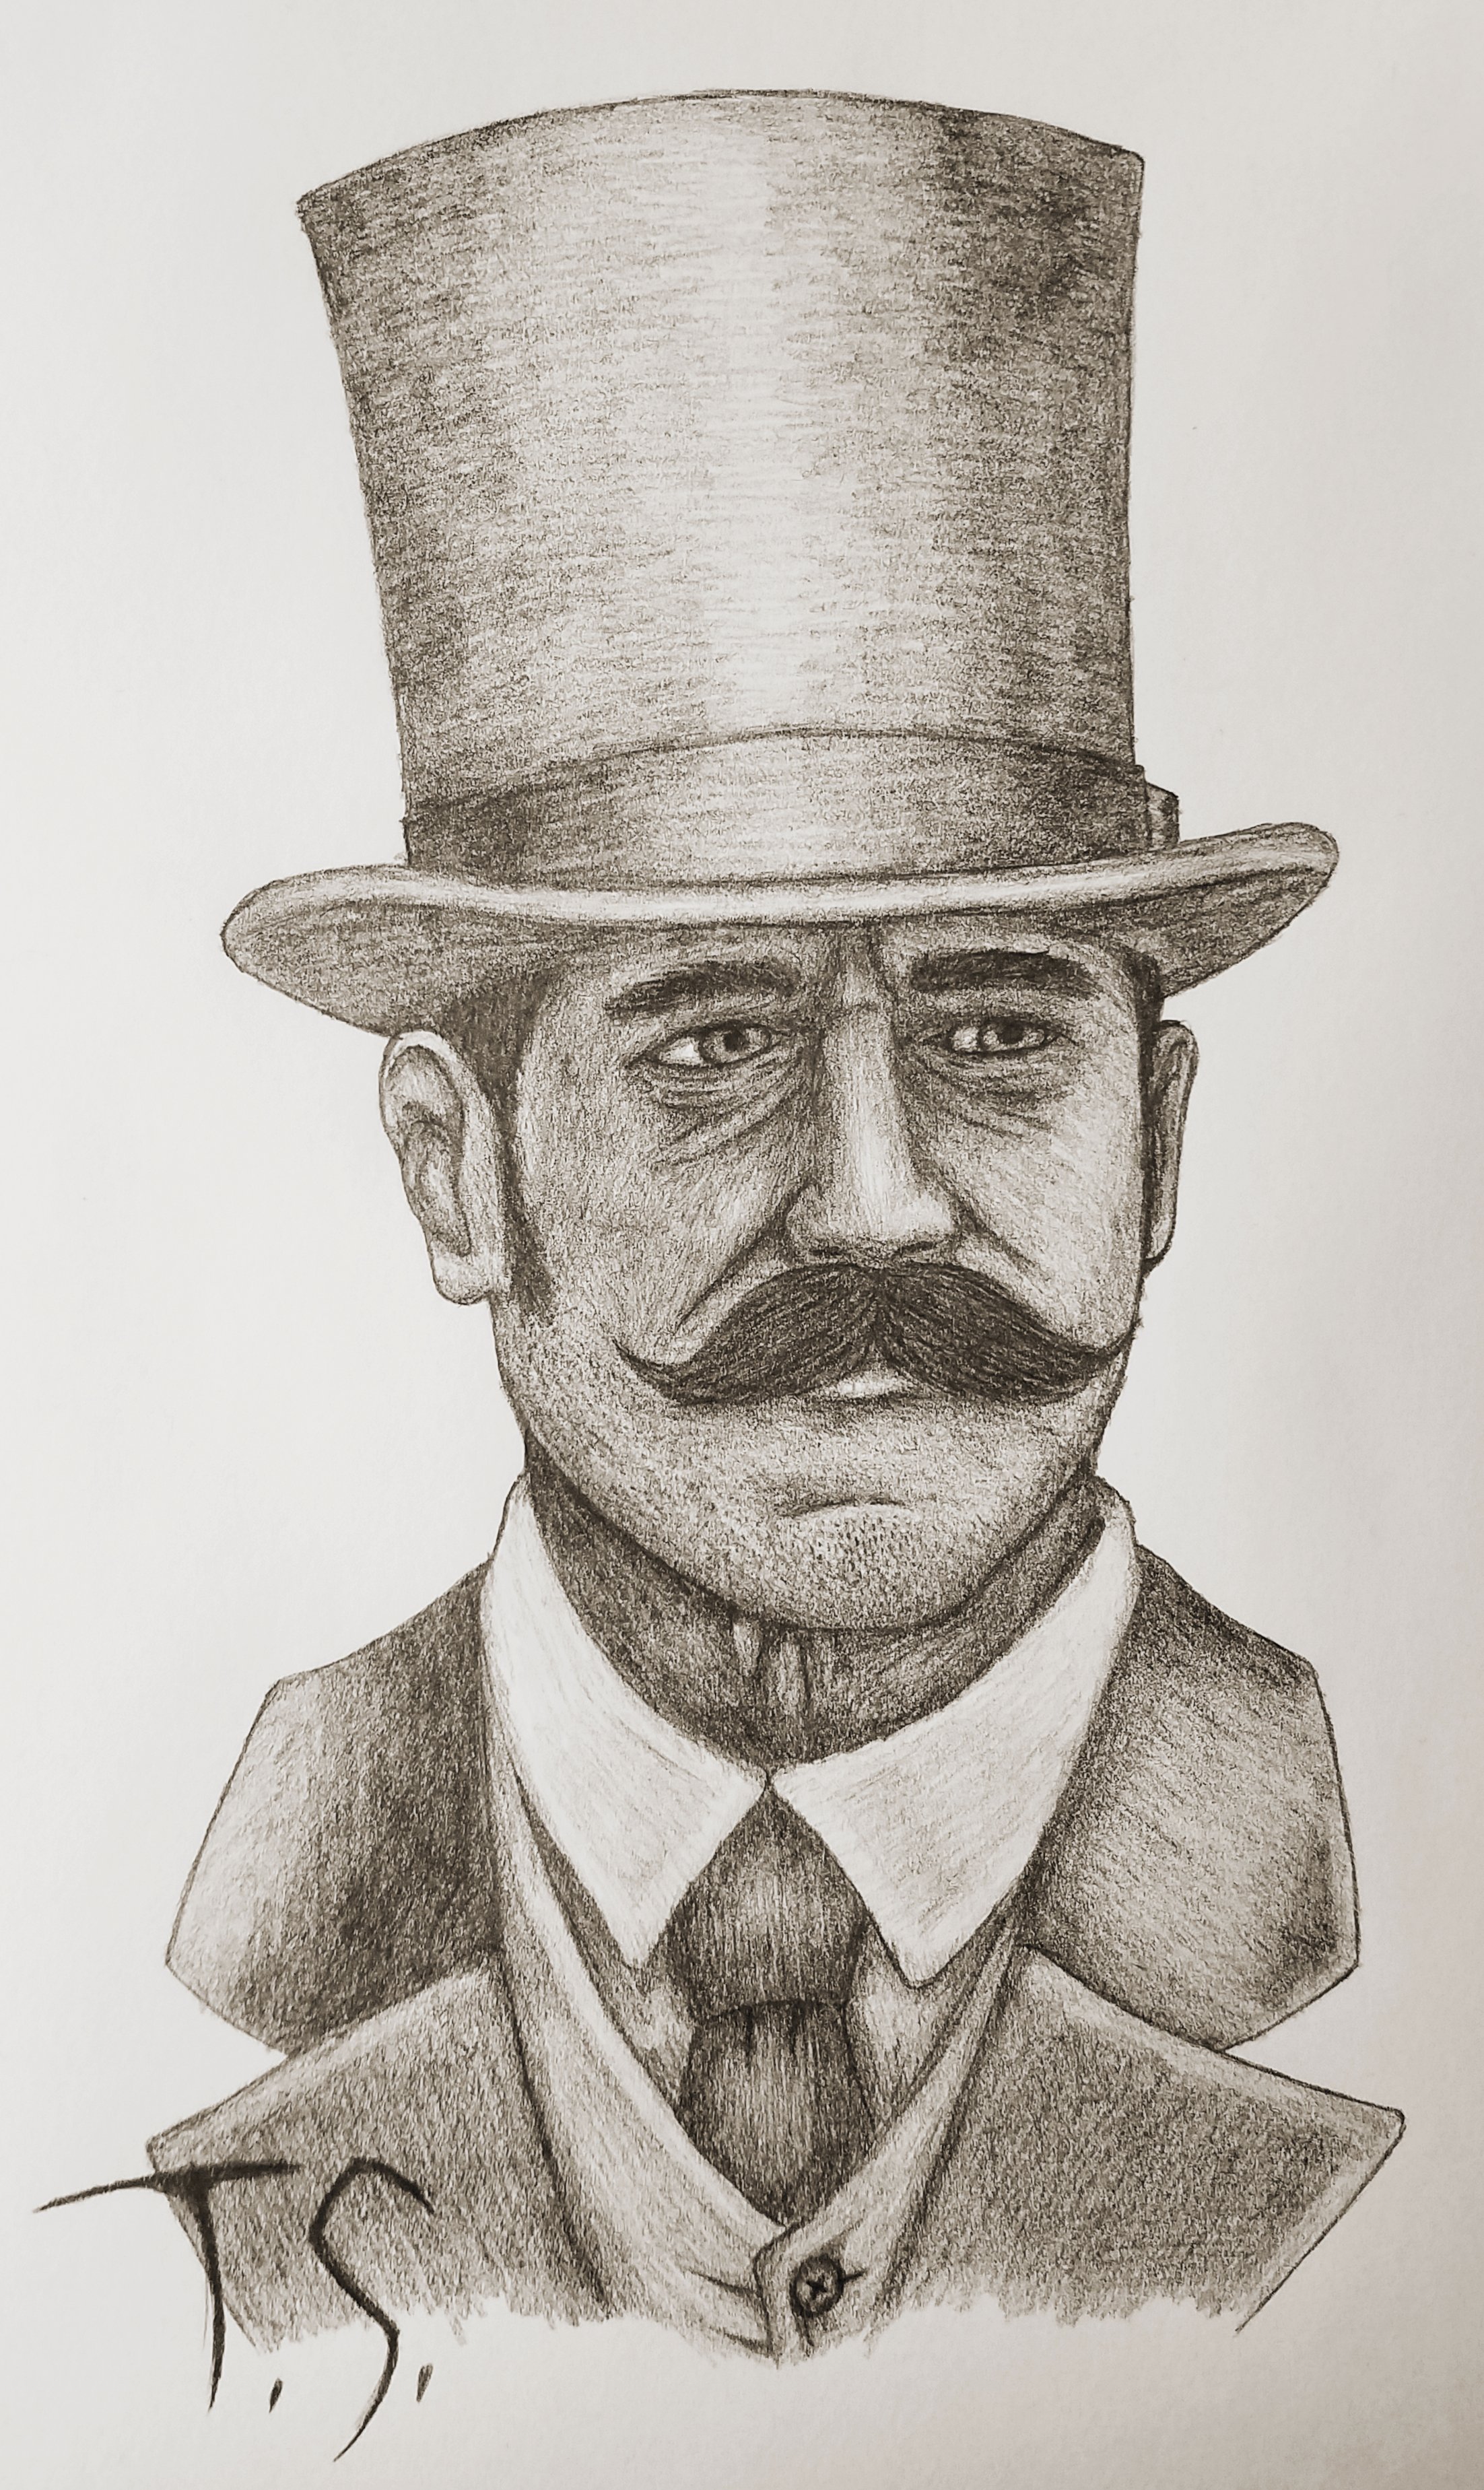 spøgelse præmedicinering tit Canvas_Creations on Twitter: "Here's my latest drawing! Strange Man from Red  Dead Redemption. "What's your name?" "You know, it's the darnedest thing,  but I can't remember." #RDR2 #RedDeadRedemption2 #RockstarGames  https://t.co/v3Sg0IiTup" / Twitter